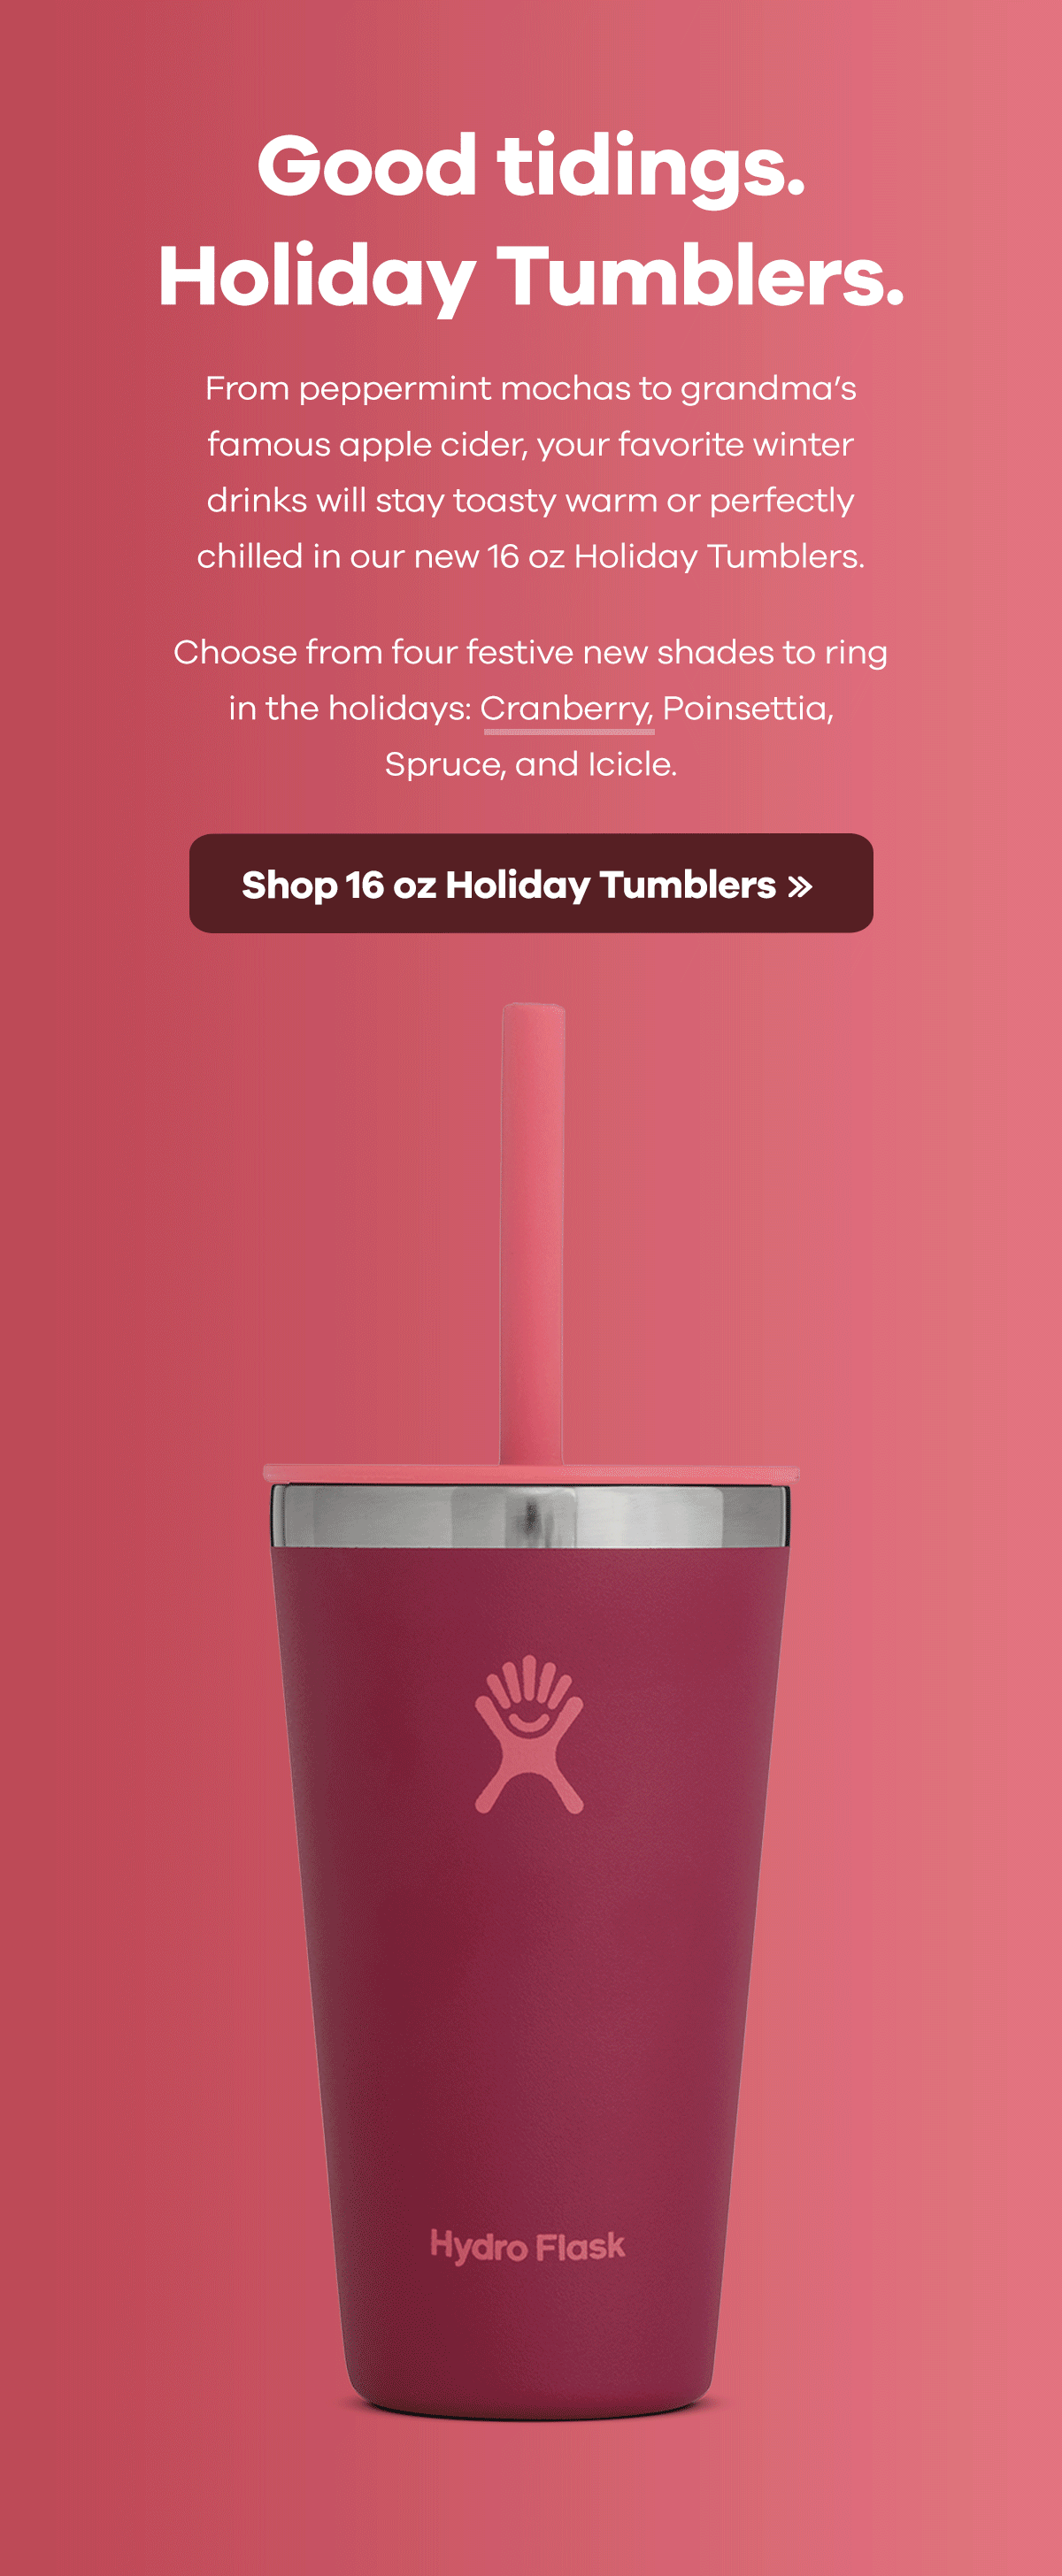 Early Access | Good tidings. Holiday Tumblers. | From pepperming mochas to grandma's famous apple cider, your favorite winter drinks will stay toasty warm or perfectly chilled in our new 16 oz Holiday Tumblers. Choose from four festive new shades to ring in the holidays: Cranberry, Poinsettia, Spruce, and Icicle. | Shop 16 oz Holiday Tumblers >>